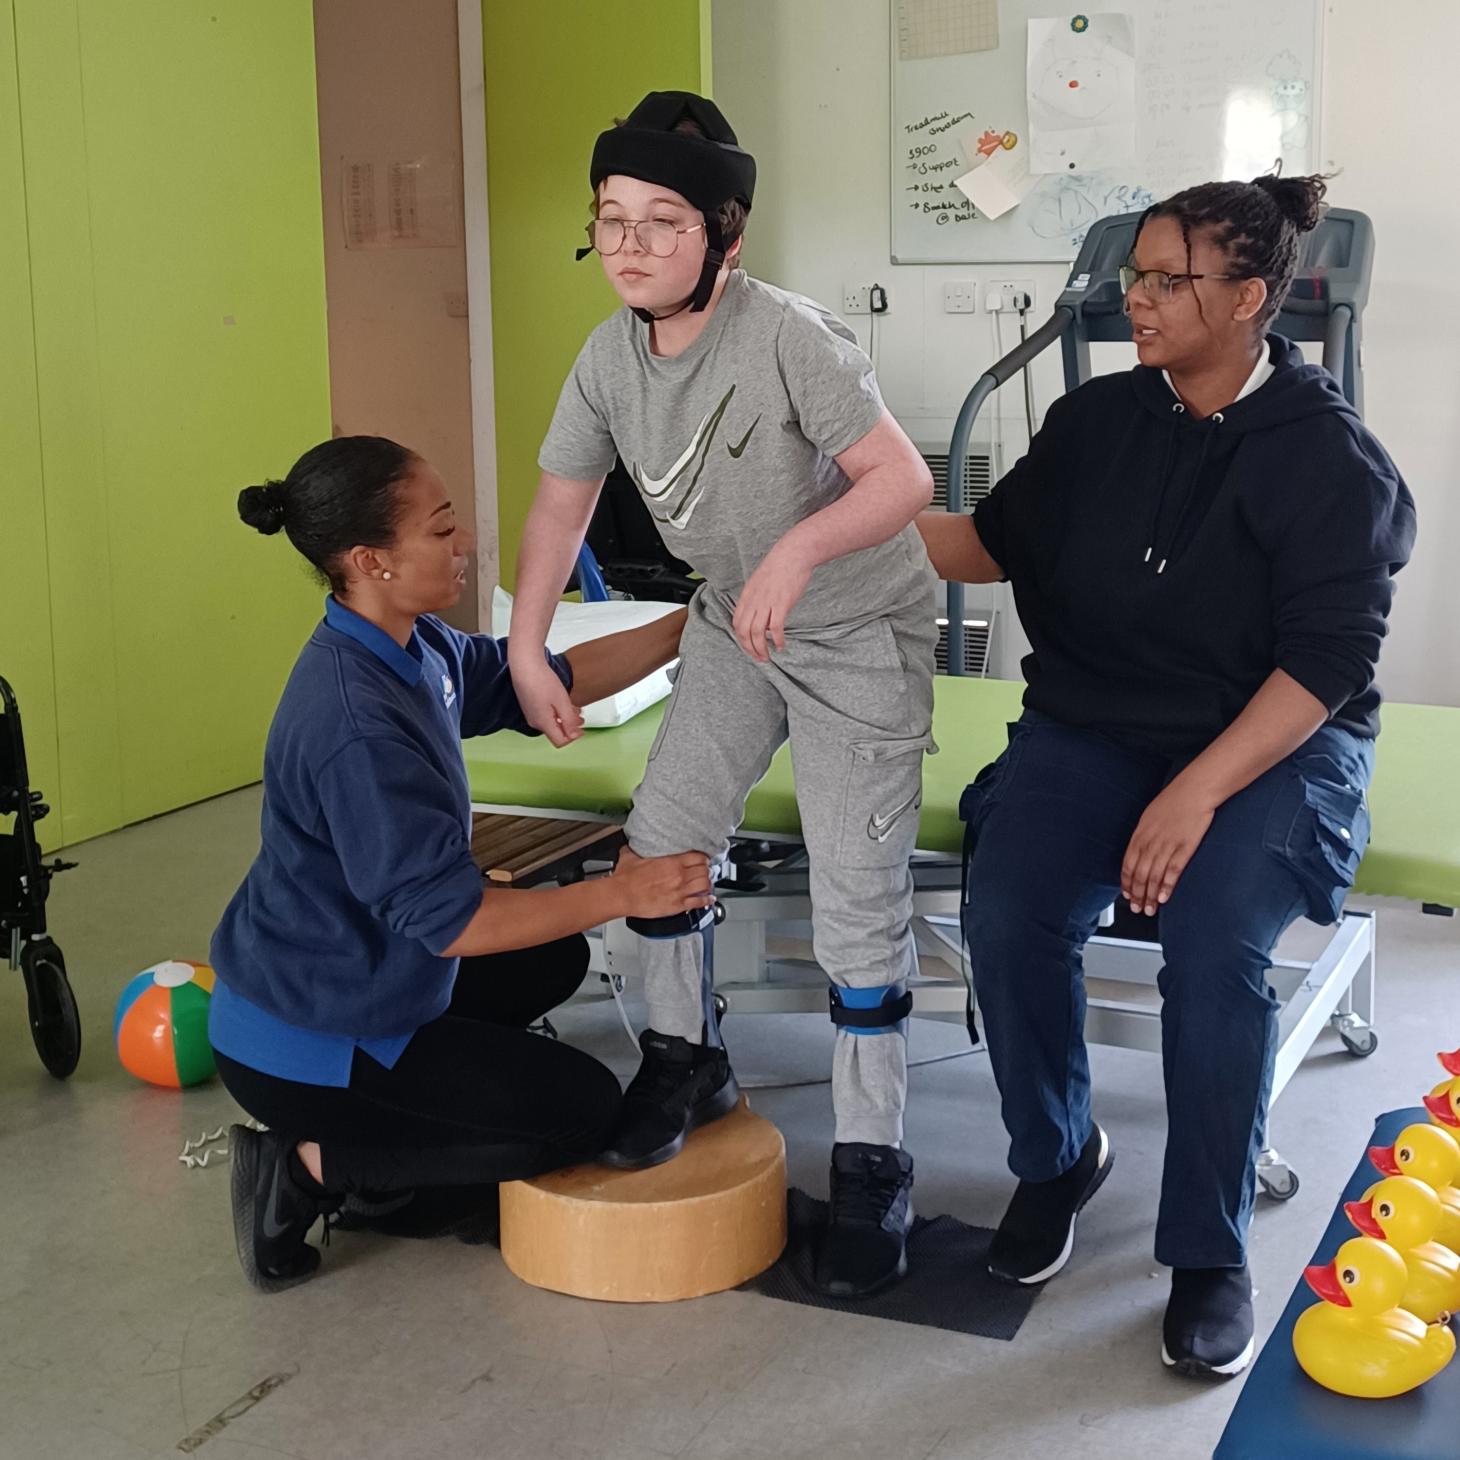 Riley standing in physiotherapy session